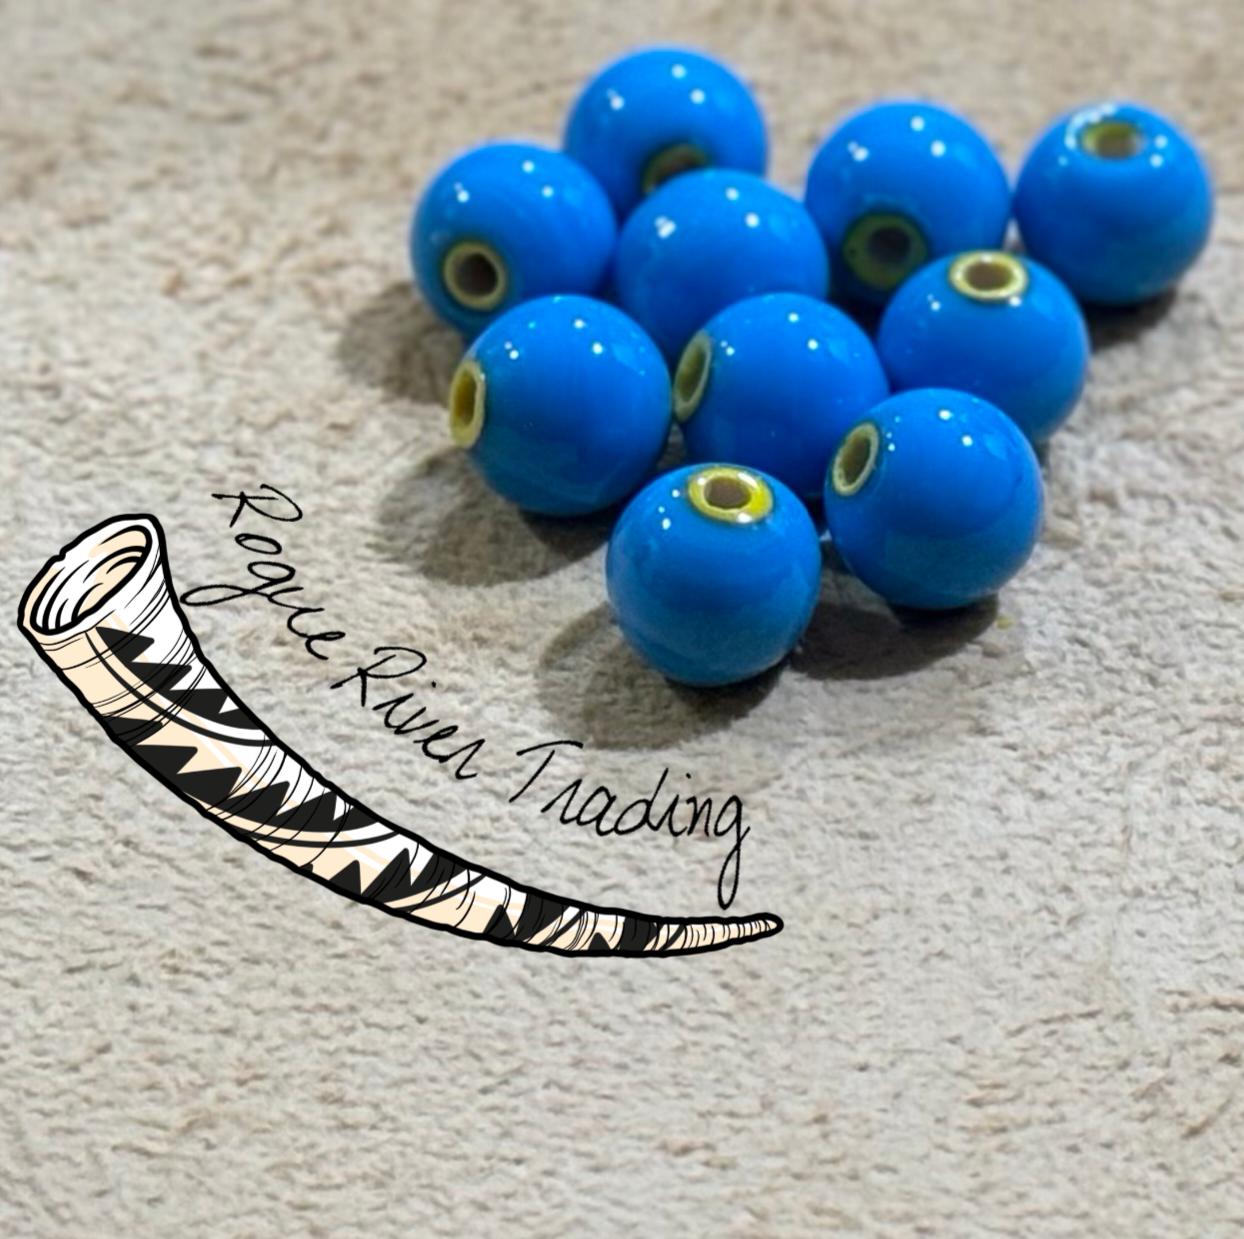 Pony Trader Blue with Yellow Core "Hudson Bay" Round 15mm (10 count)